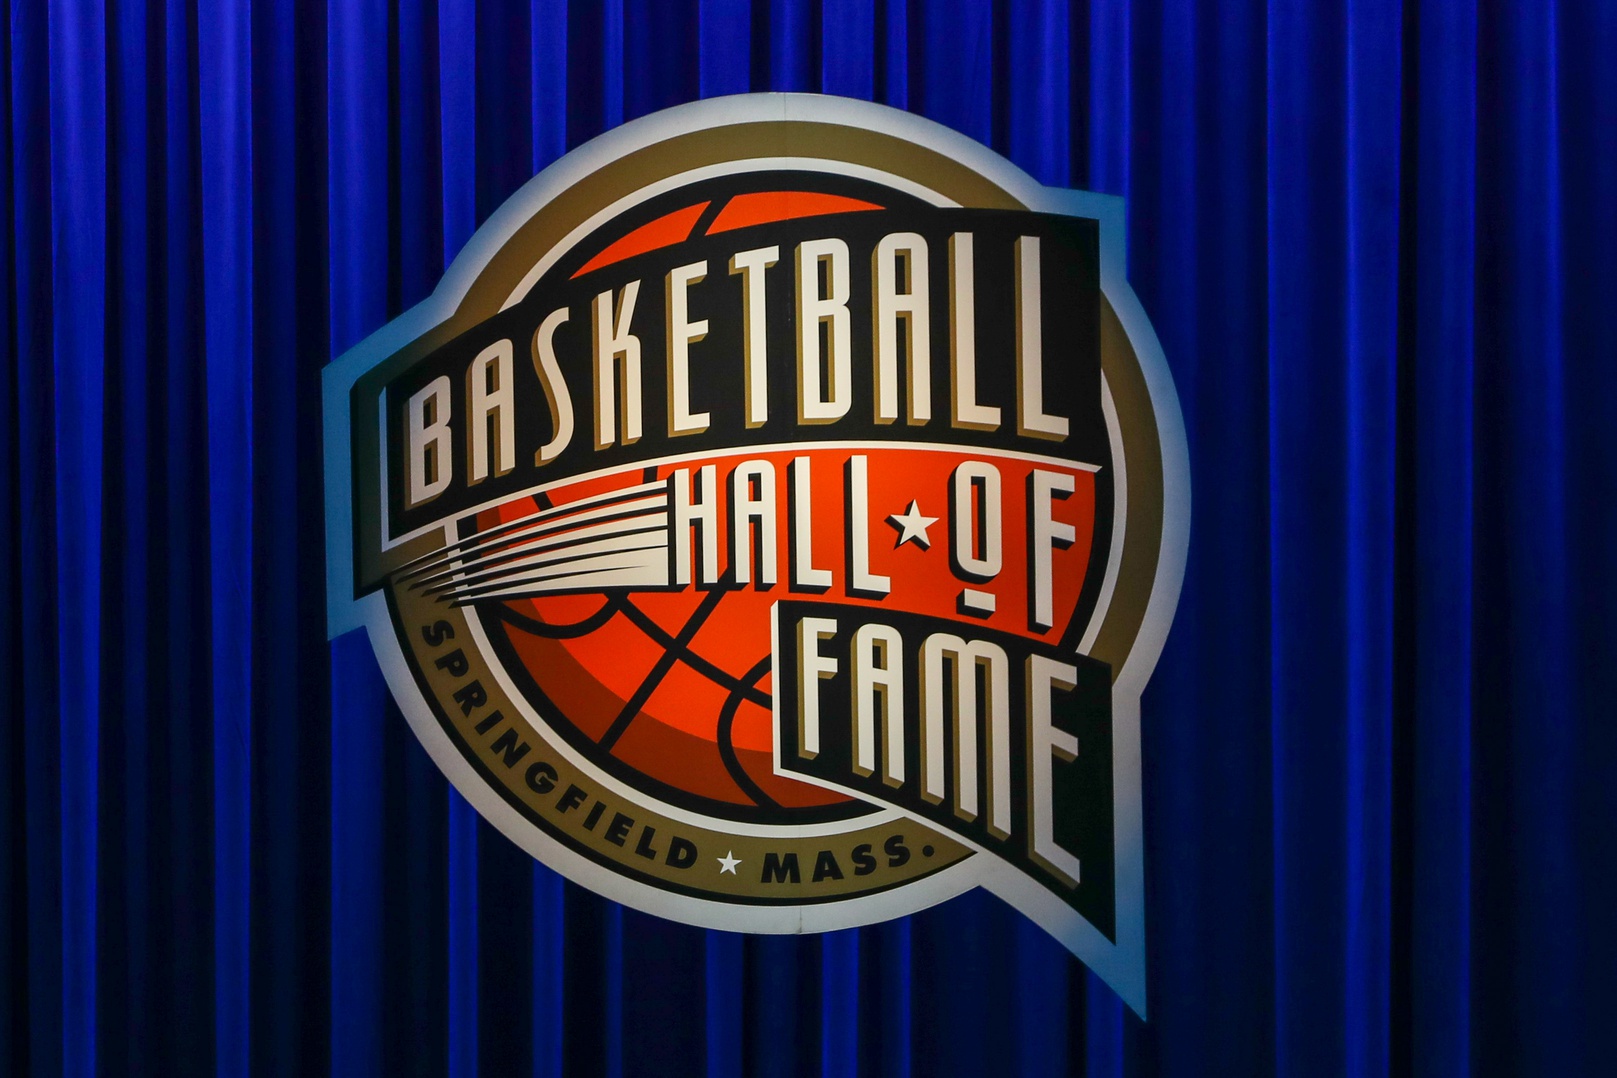 Sep 10, 2022; Springfield, MA, USA; The official logo at the 2022 Basketball Hall of Fame at Symphony Hall. Mandatory Credit: Wendell Cruz-USA TODAY Sports